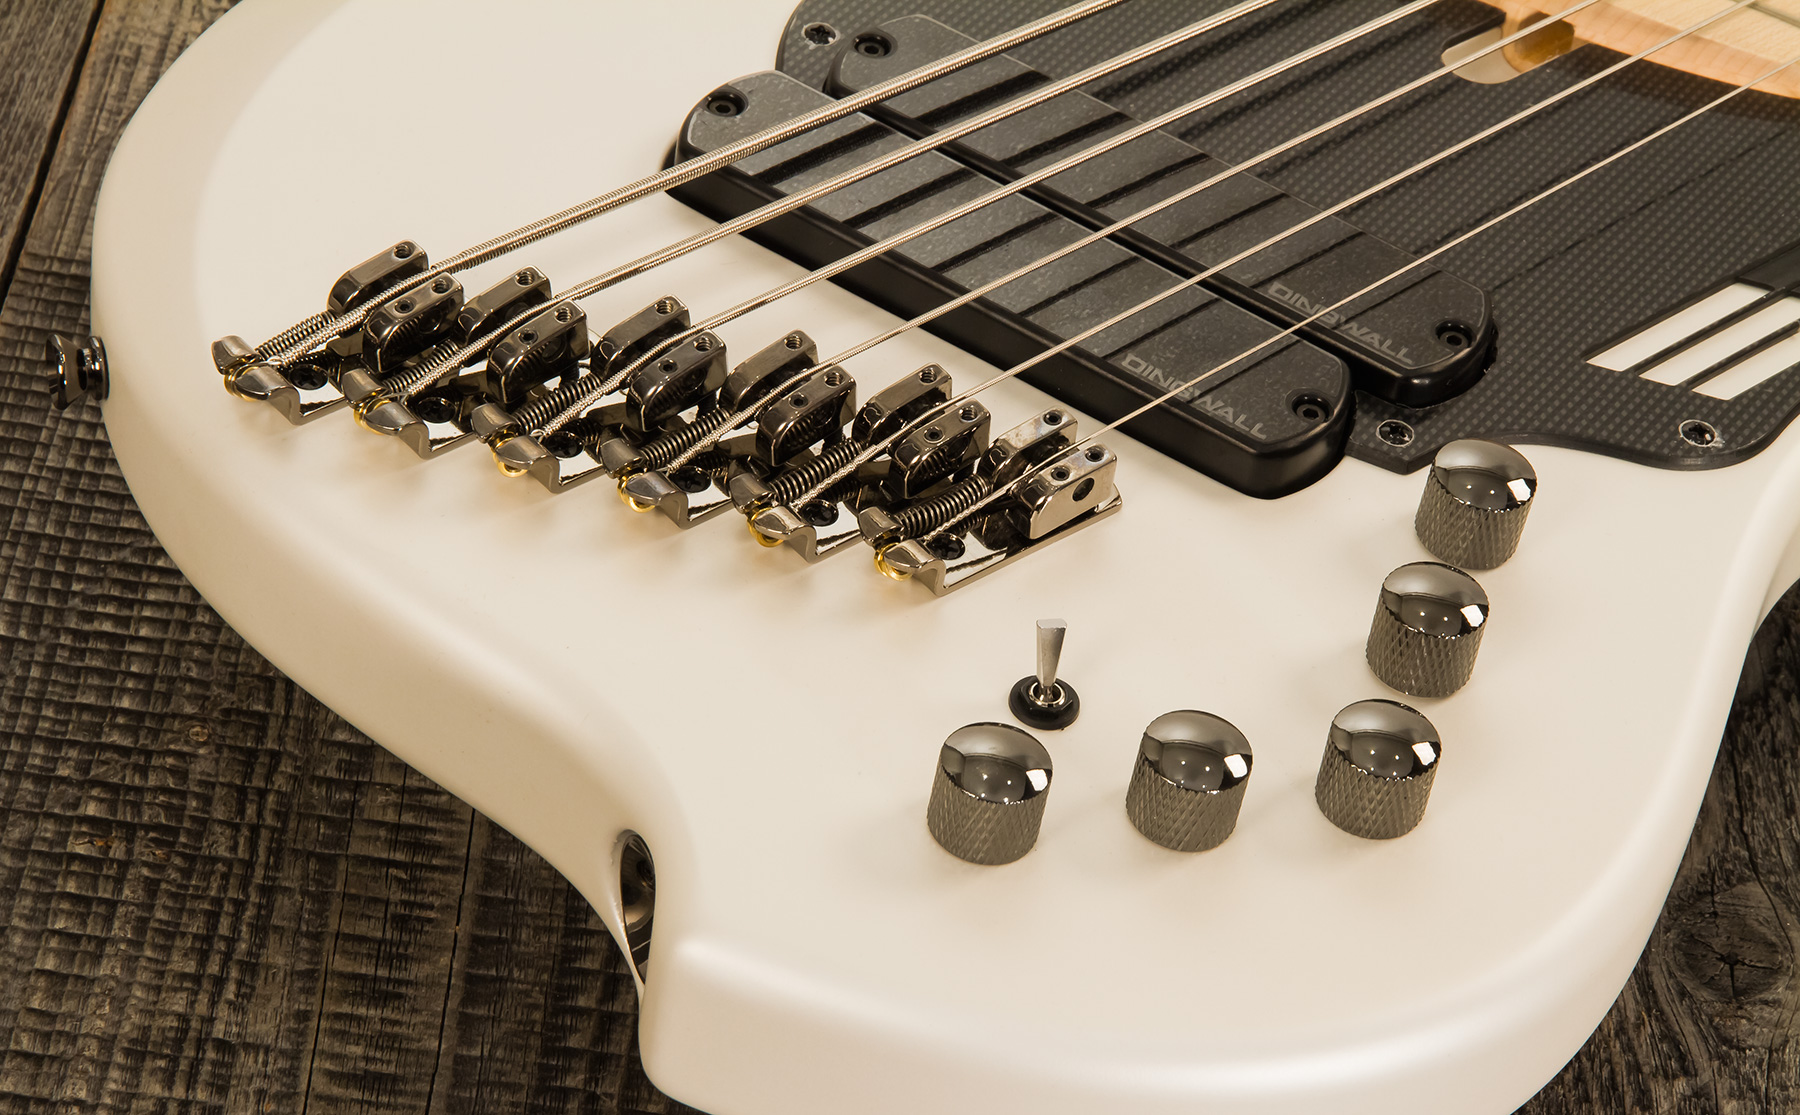 Dingwall Adam Nolly Getgood Ng2 6c 2pu Signature Active Mn - Ducati Pearl White - Solid body electric bass - Variation 3